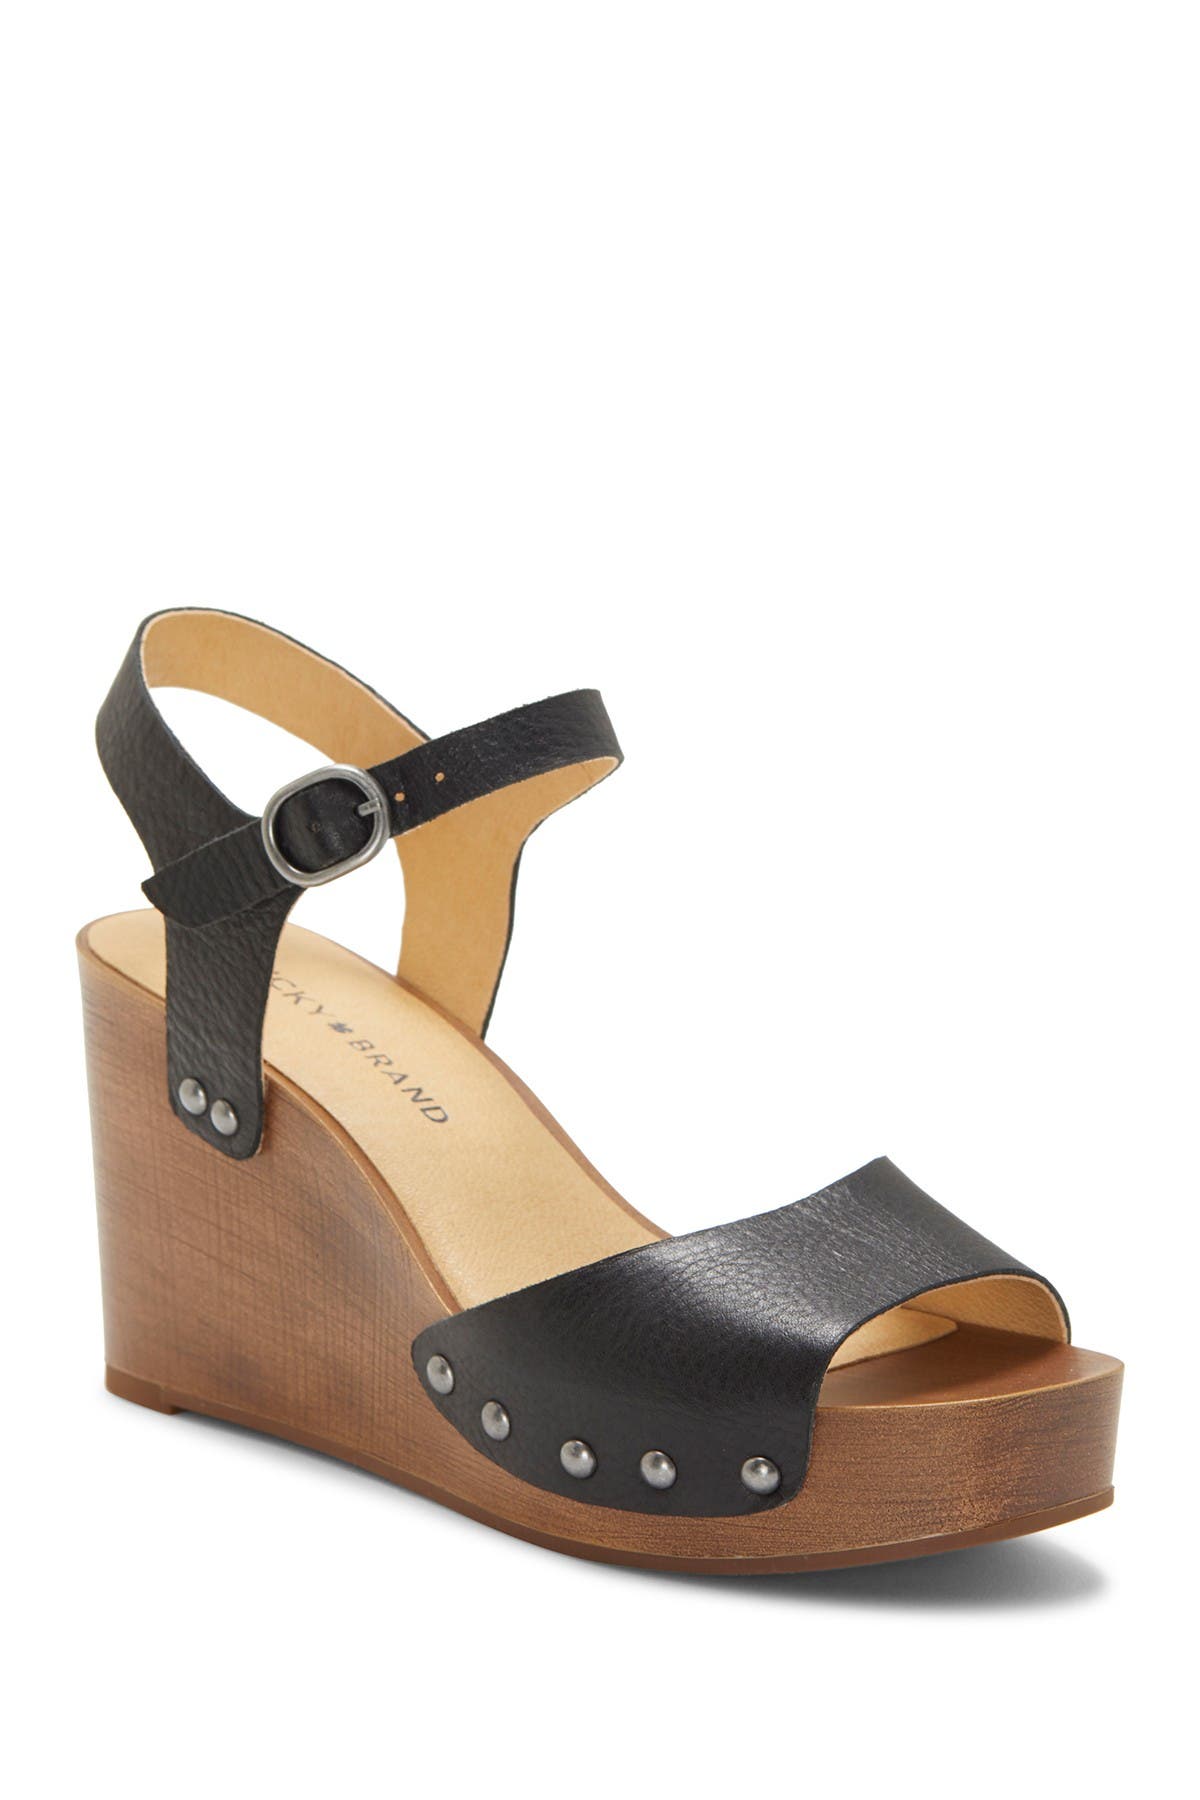 lucky brand shoes nordstrom rack